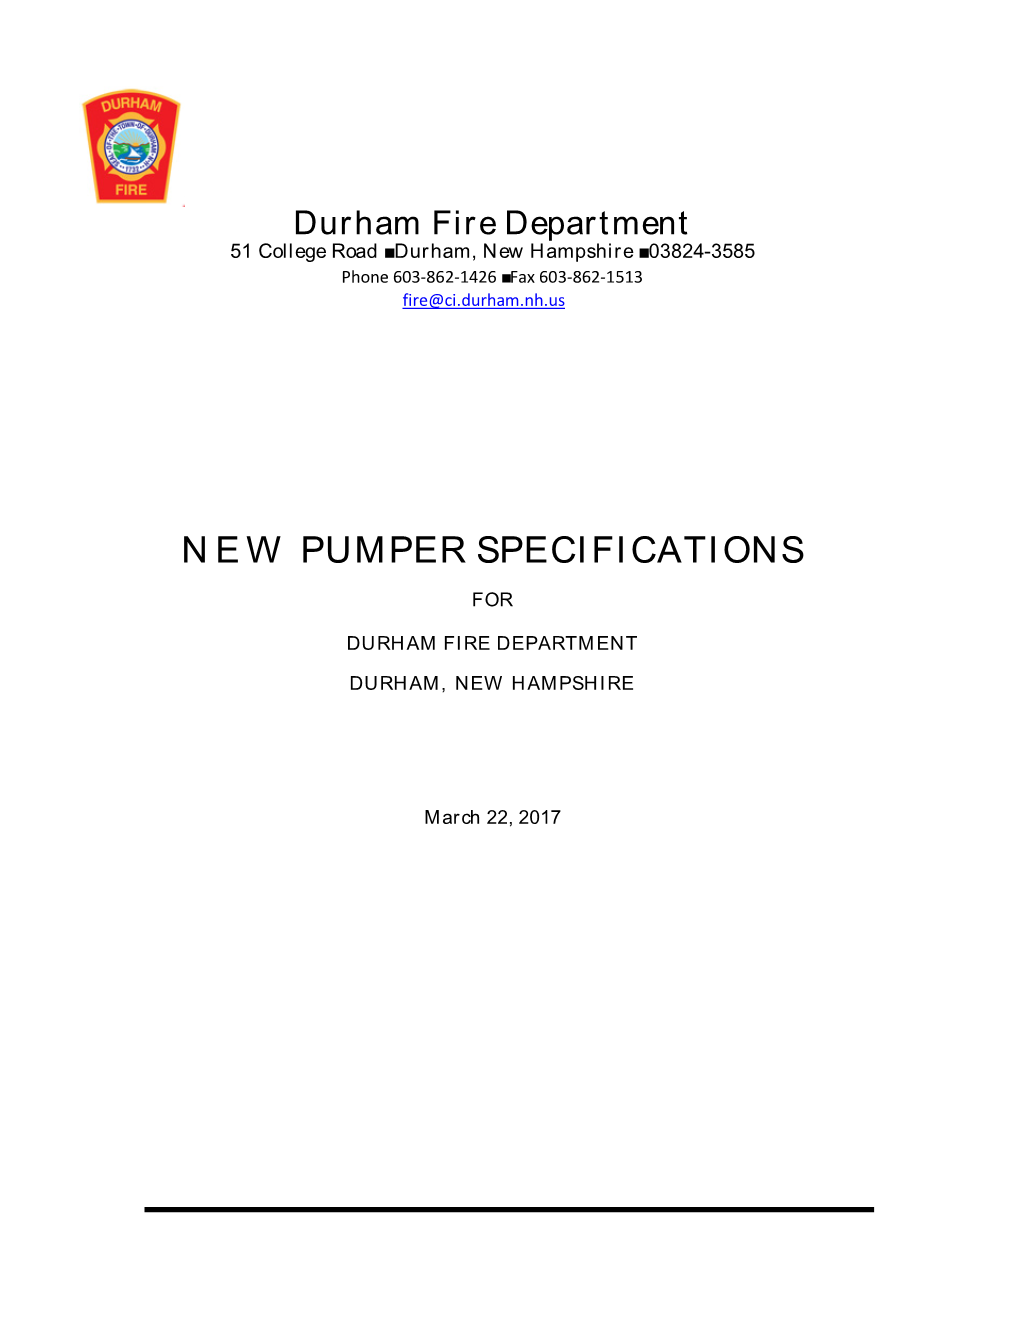 New Pumper Specifications